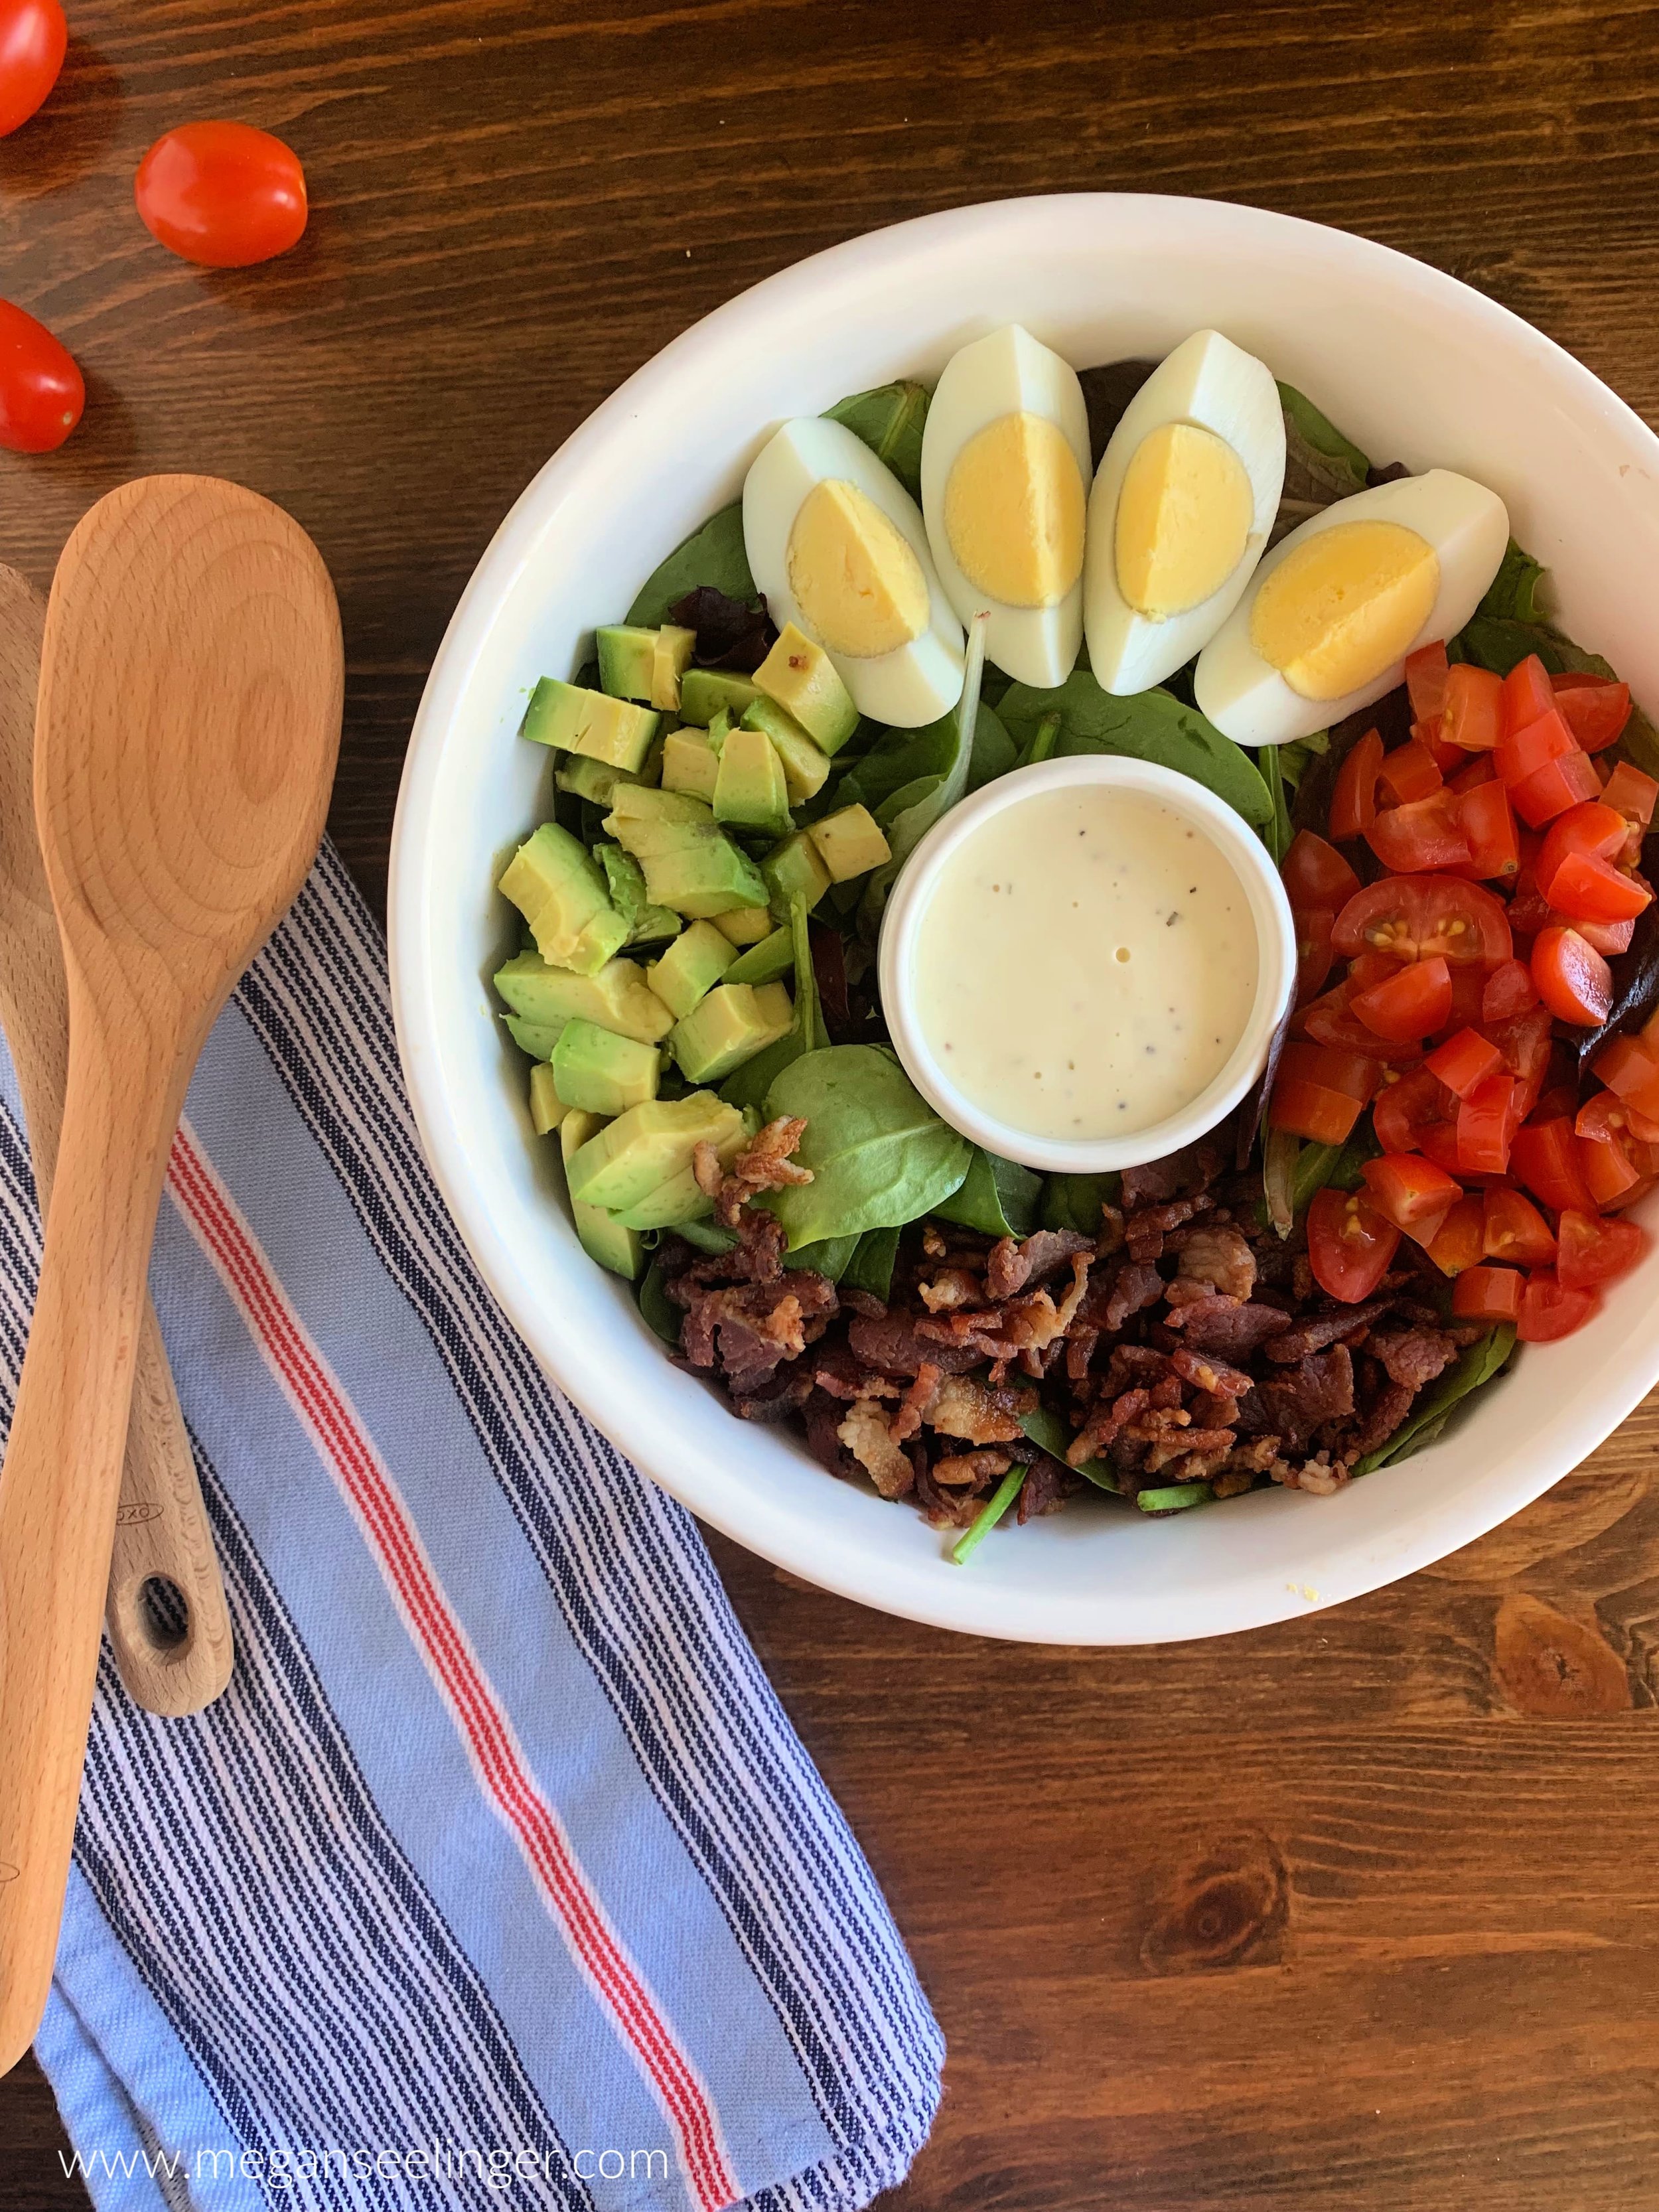 Meal Prep Salads for Weight Loss (Healthy Cobb Salad Recipe)